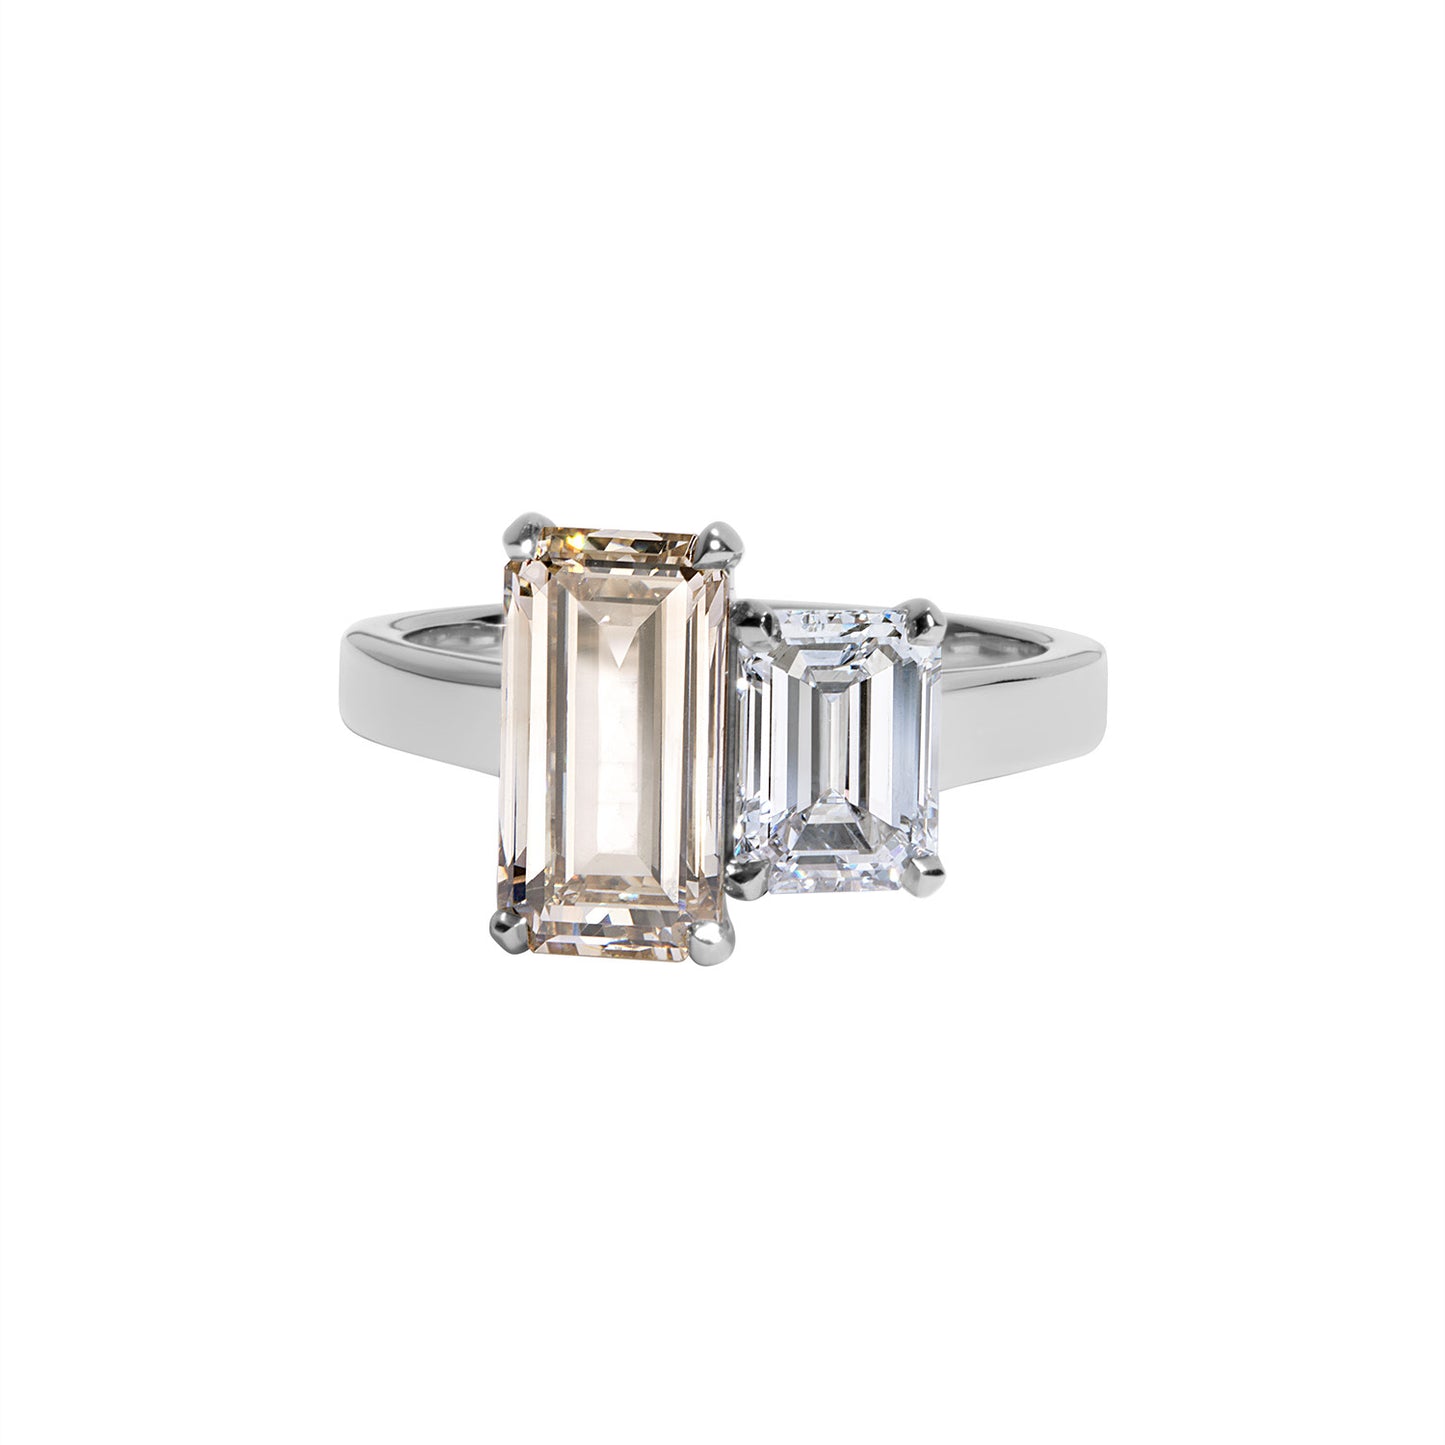 Emerald-cut diamond engagement ring featuring a central champagne diamond flanked by 1 white diamonds on a platinum band.